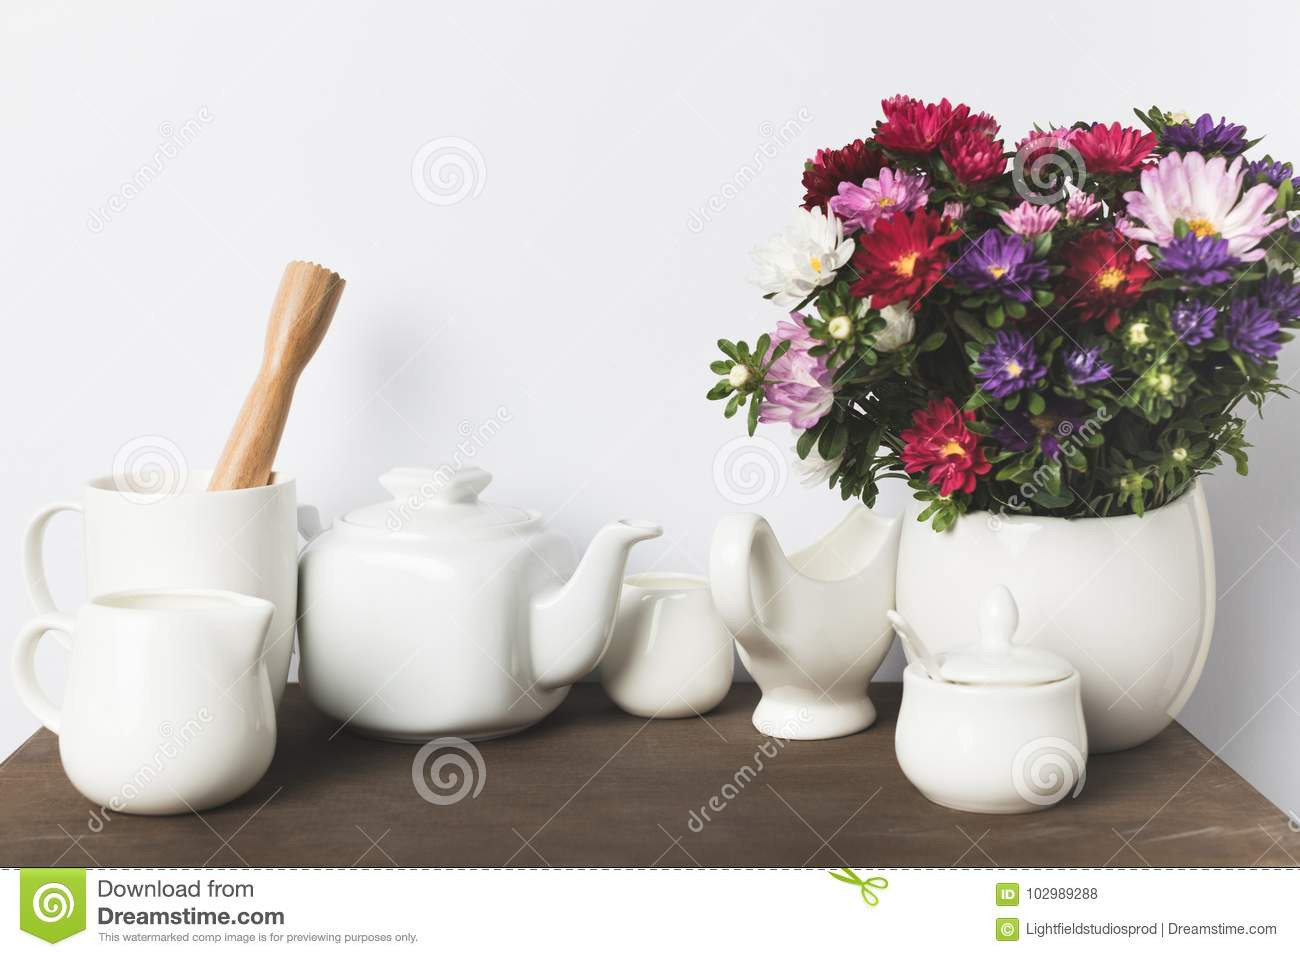 20 Ideal soccer Ball Flower Vases 2024 free download soccer ball flower vases of kitchen utensils and flowers stock photo image of domestic table intended for kitchen utensils and flowers